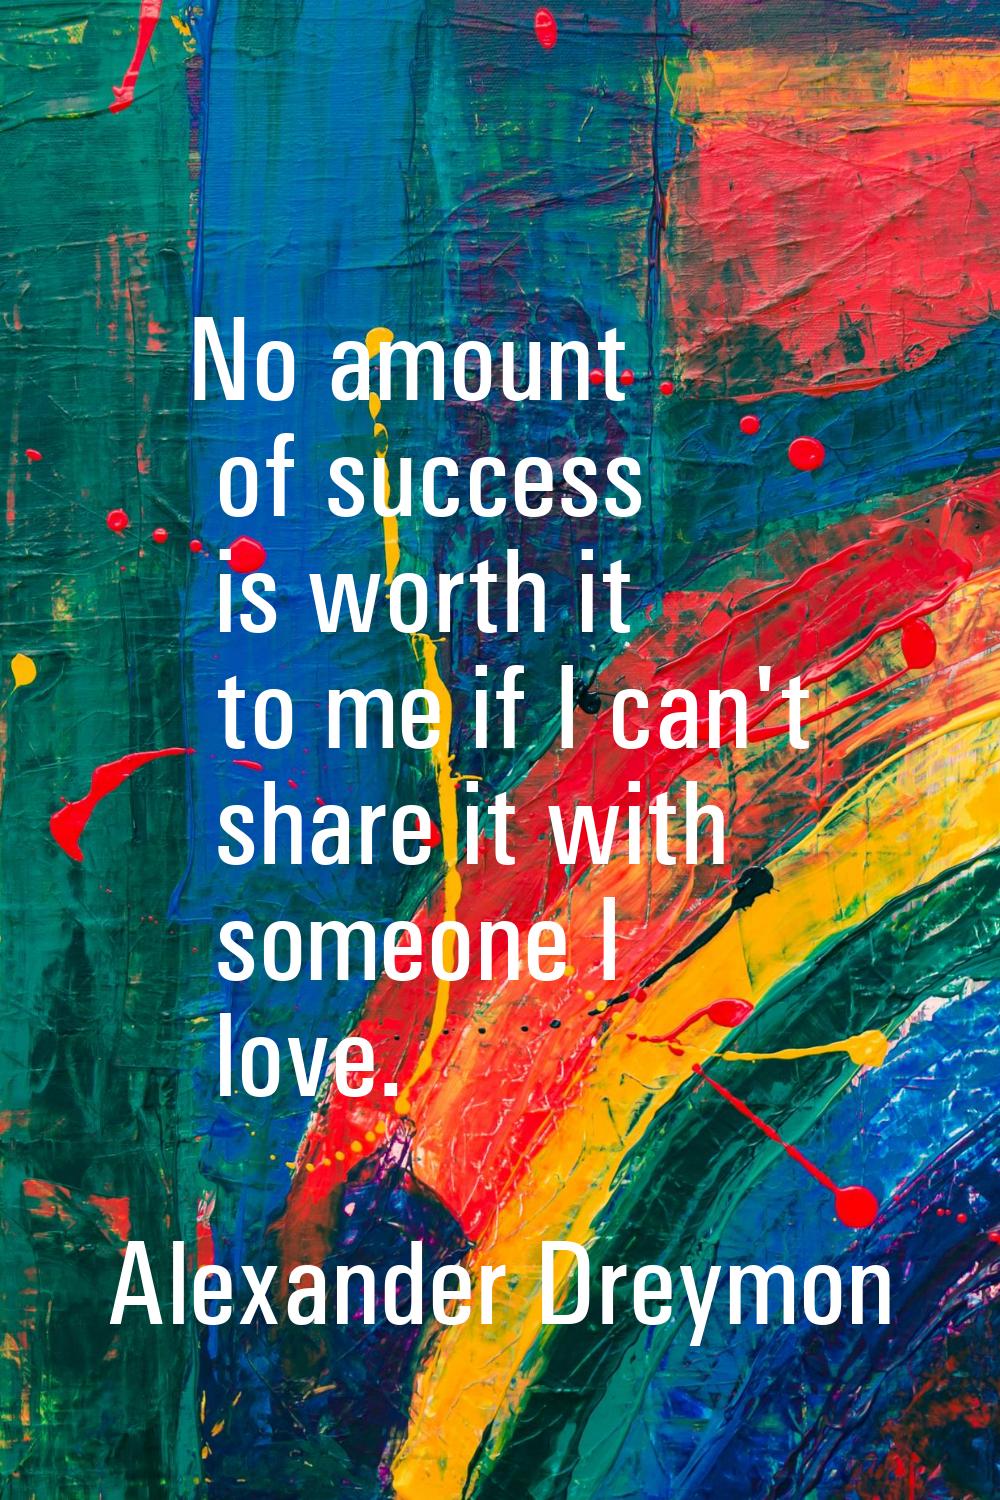 No amount of success is worth it to me if I can't share it with someone I love.